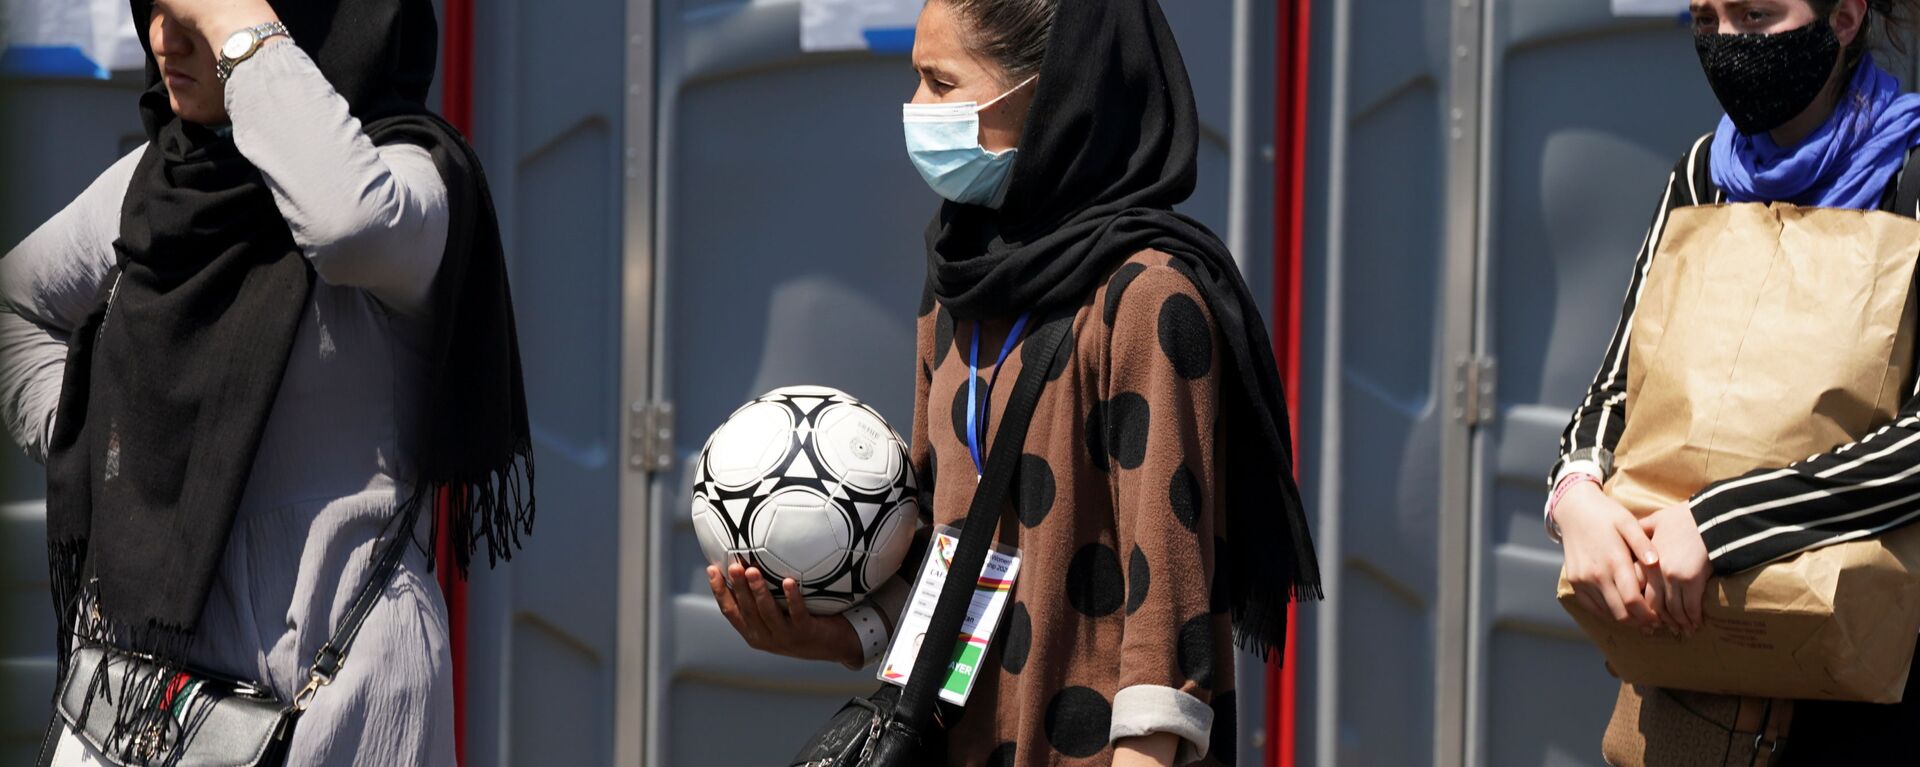 An Afghan woman holding a soccer ball and wearing a CAFA (Central Asian Football Association) credential, waits in line at a processing center for refugees evacuated from Afghanistan at the Dulles Expo Center near Dulles International Airport in Chantilly, Virginia, U.S., August 24, 2021 - Sputnik International, 1920, 20.09.2021